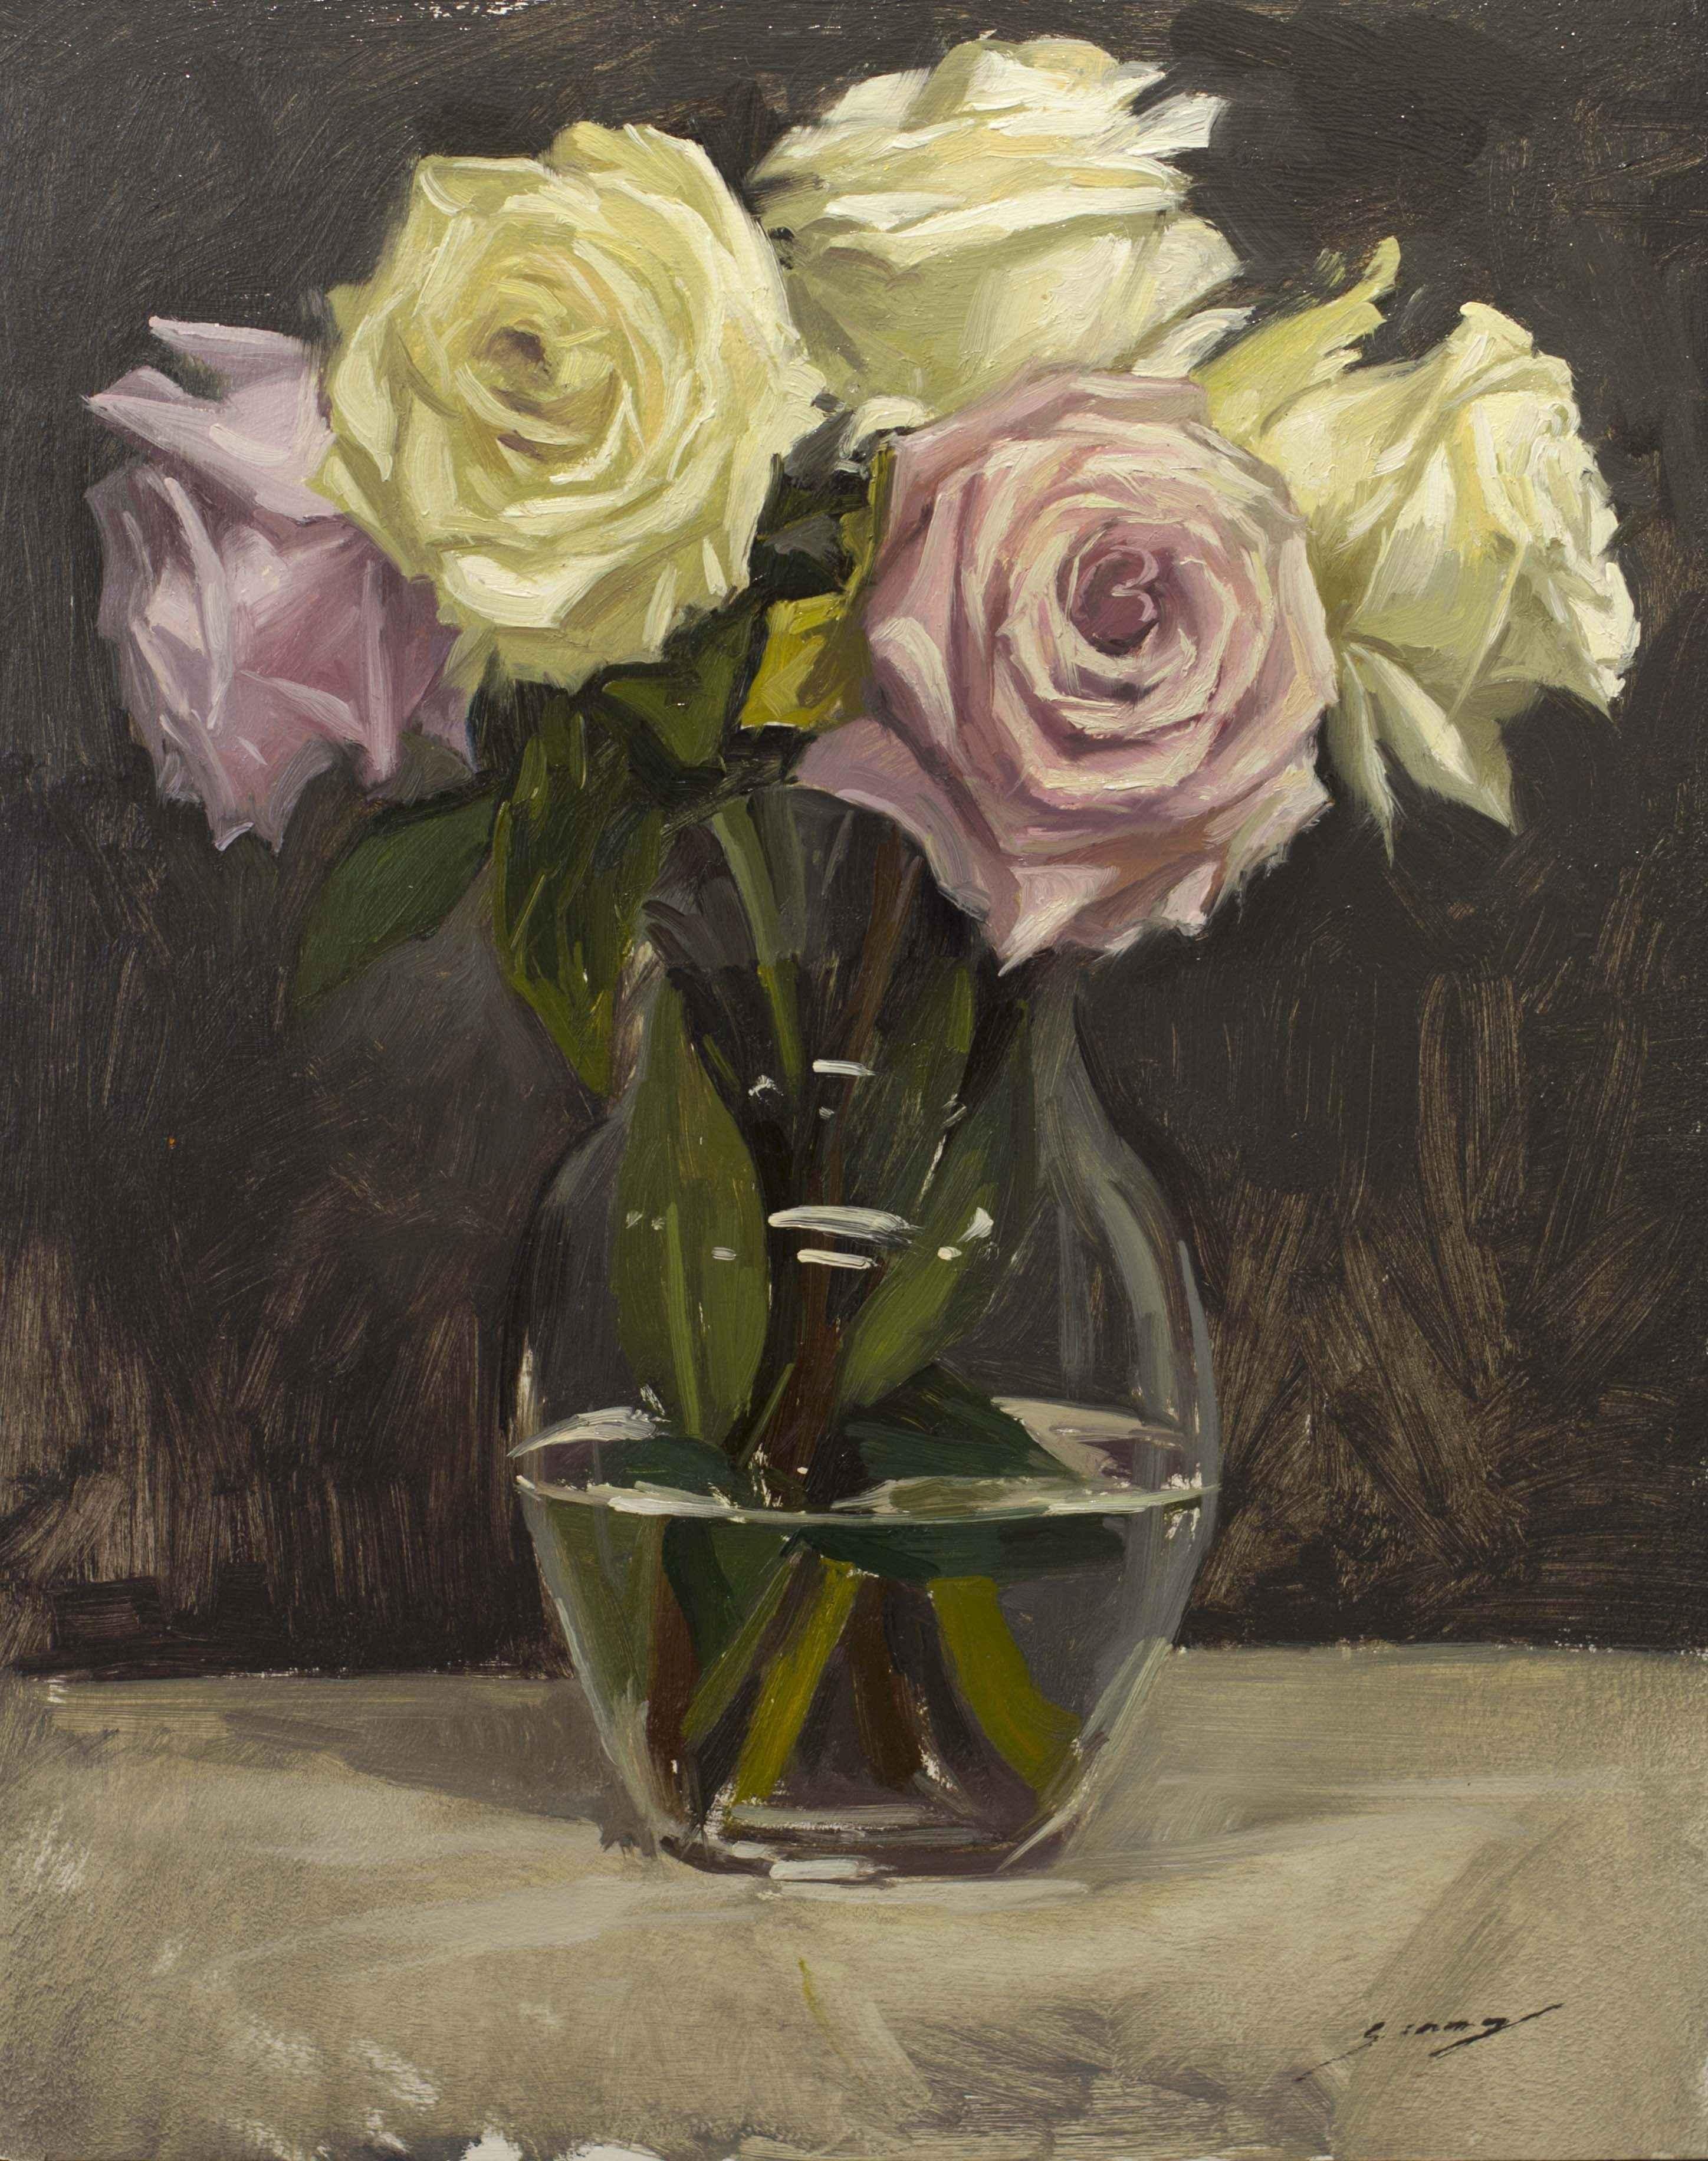 Sung Eun Kim Still-Life Painting - Study of White & Pink Roses on Glass Vase (framed)